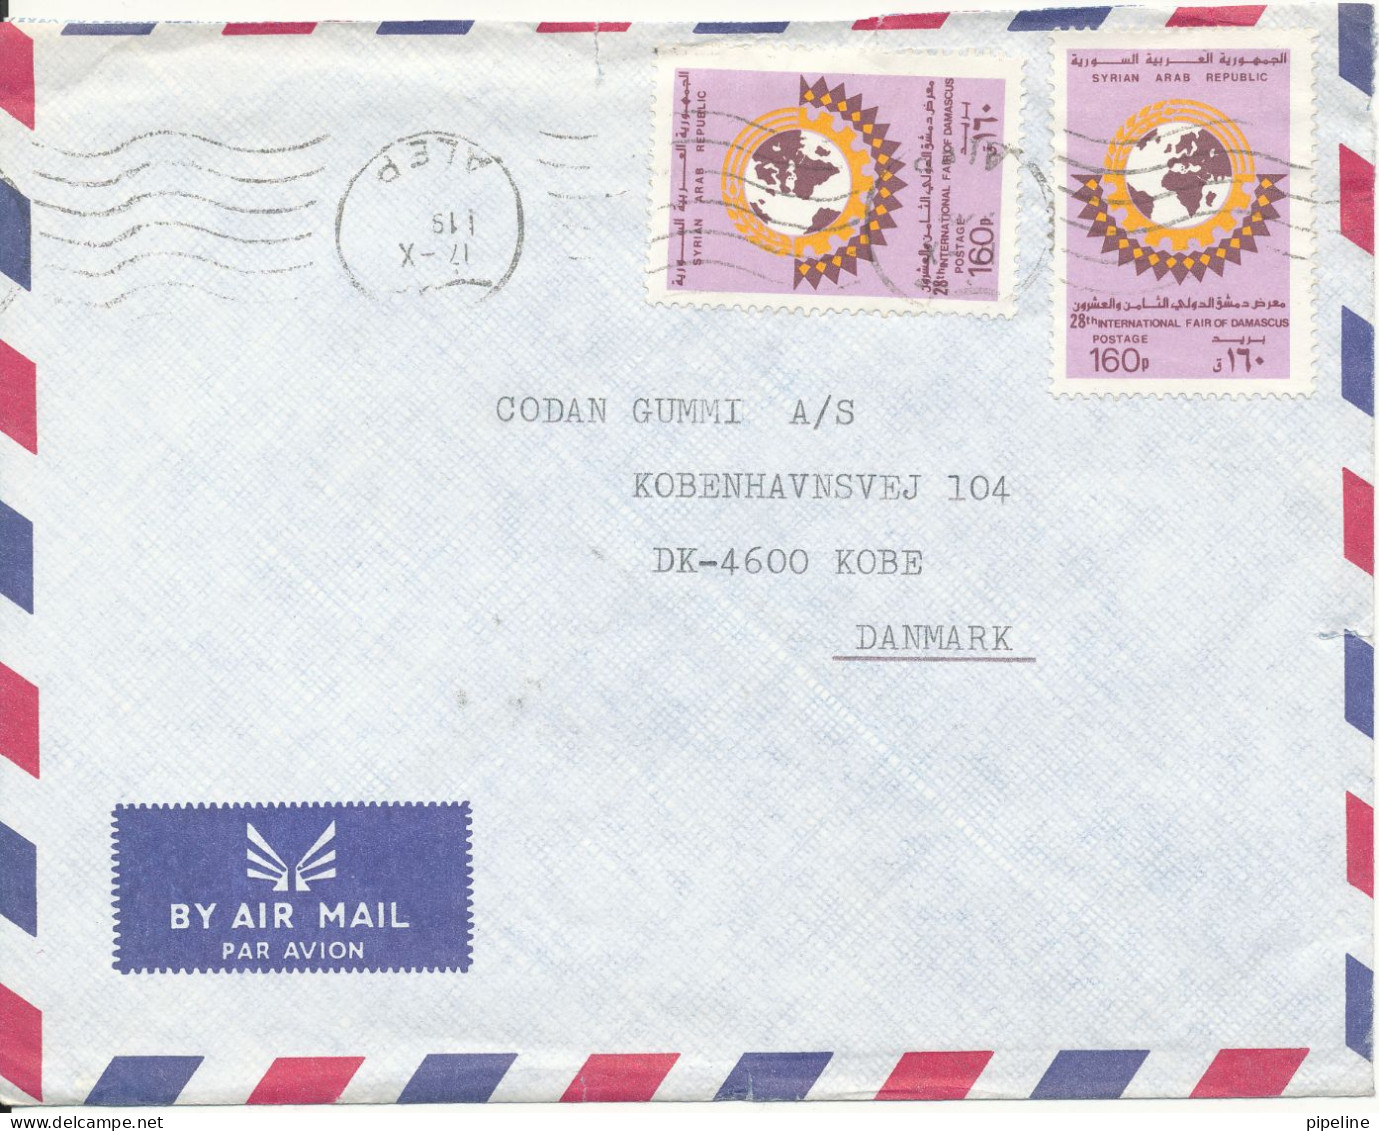 Syria Air Mail Cover Sent To Denmark Alepo 17-10-1981 Topic Stamps Small Tears On The Cover - Lebanon